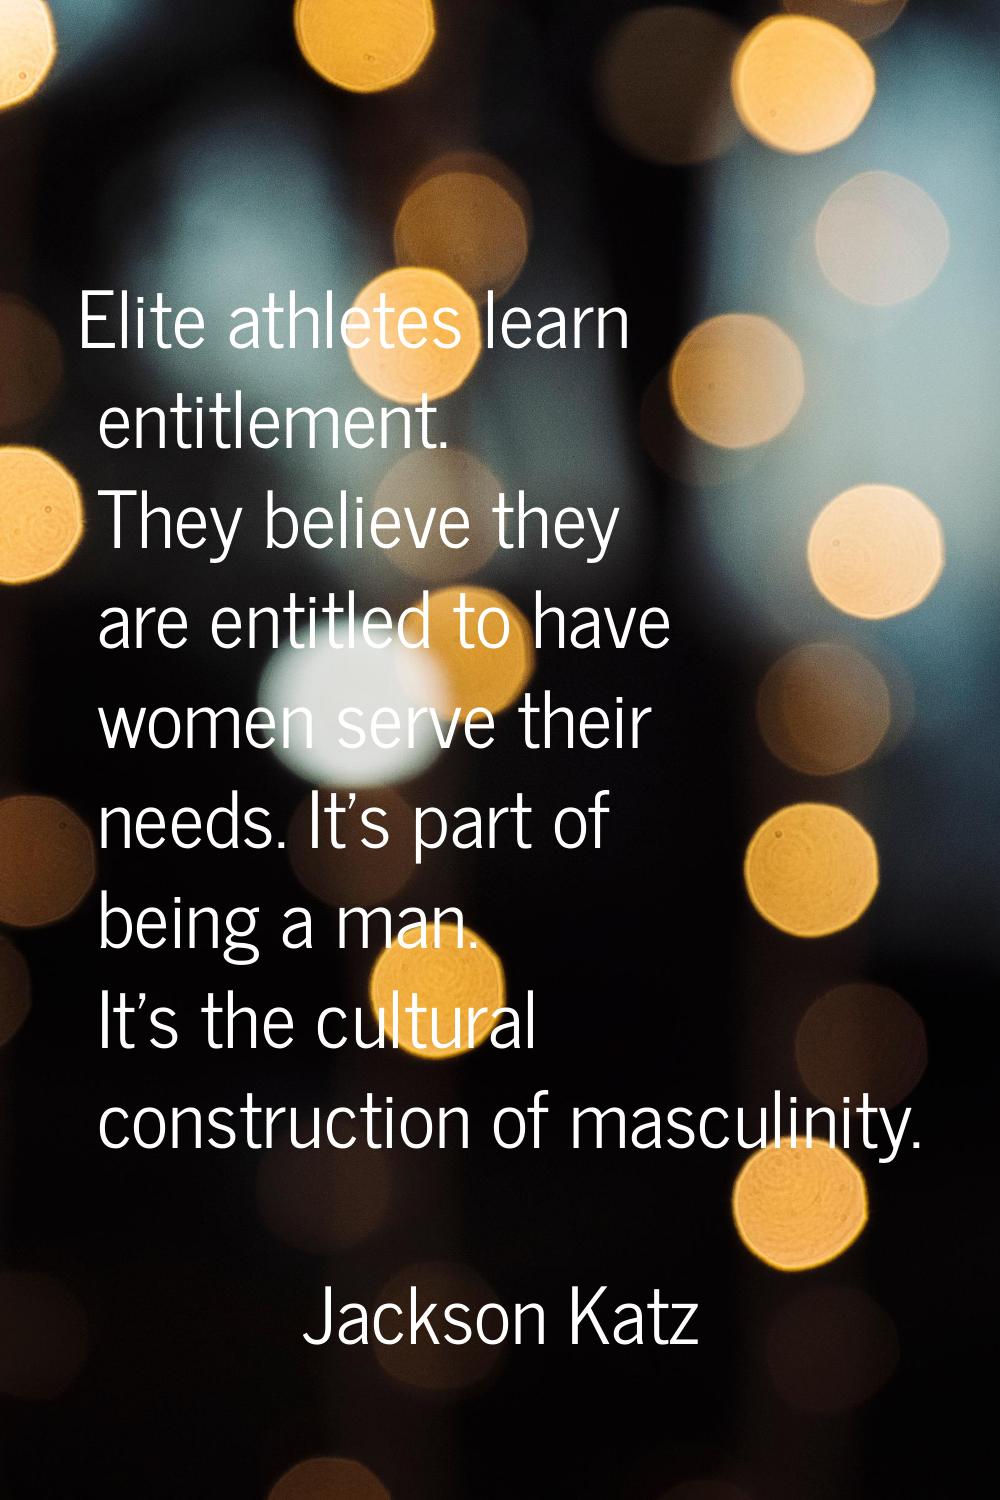 Elite athletes learn entitlement. They believe they are entitled to have women serve their needs. I